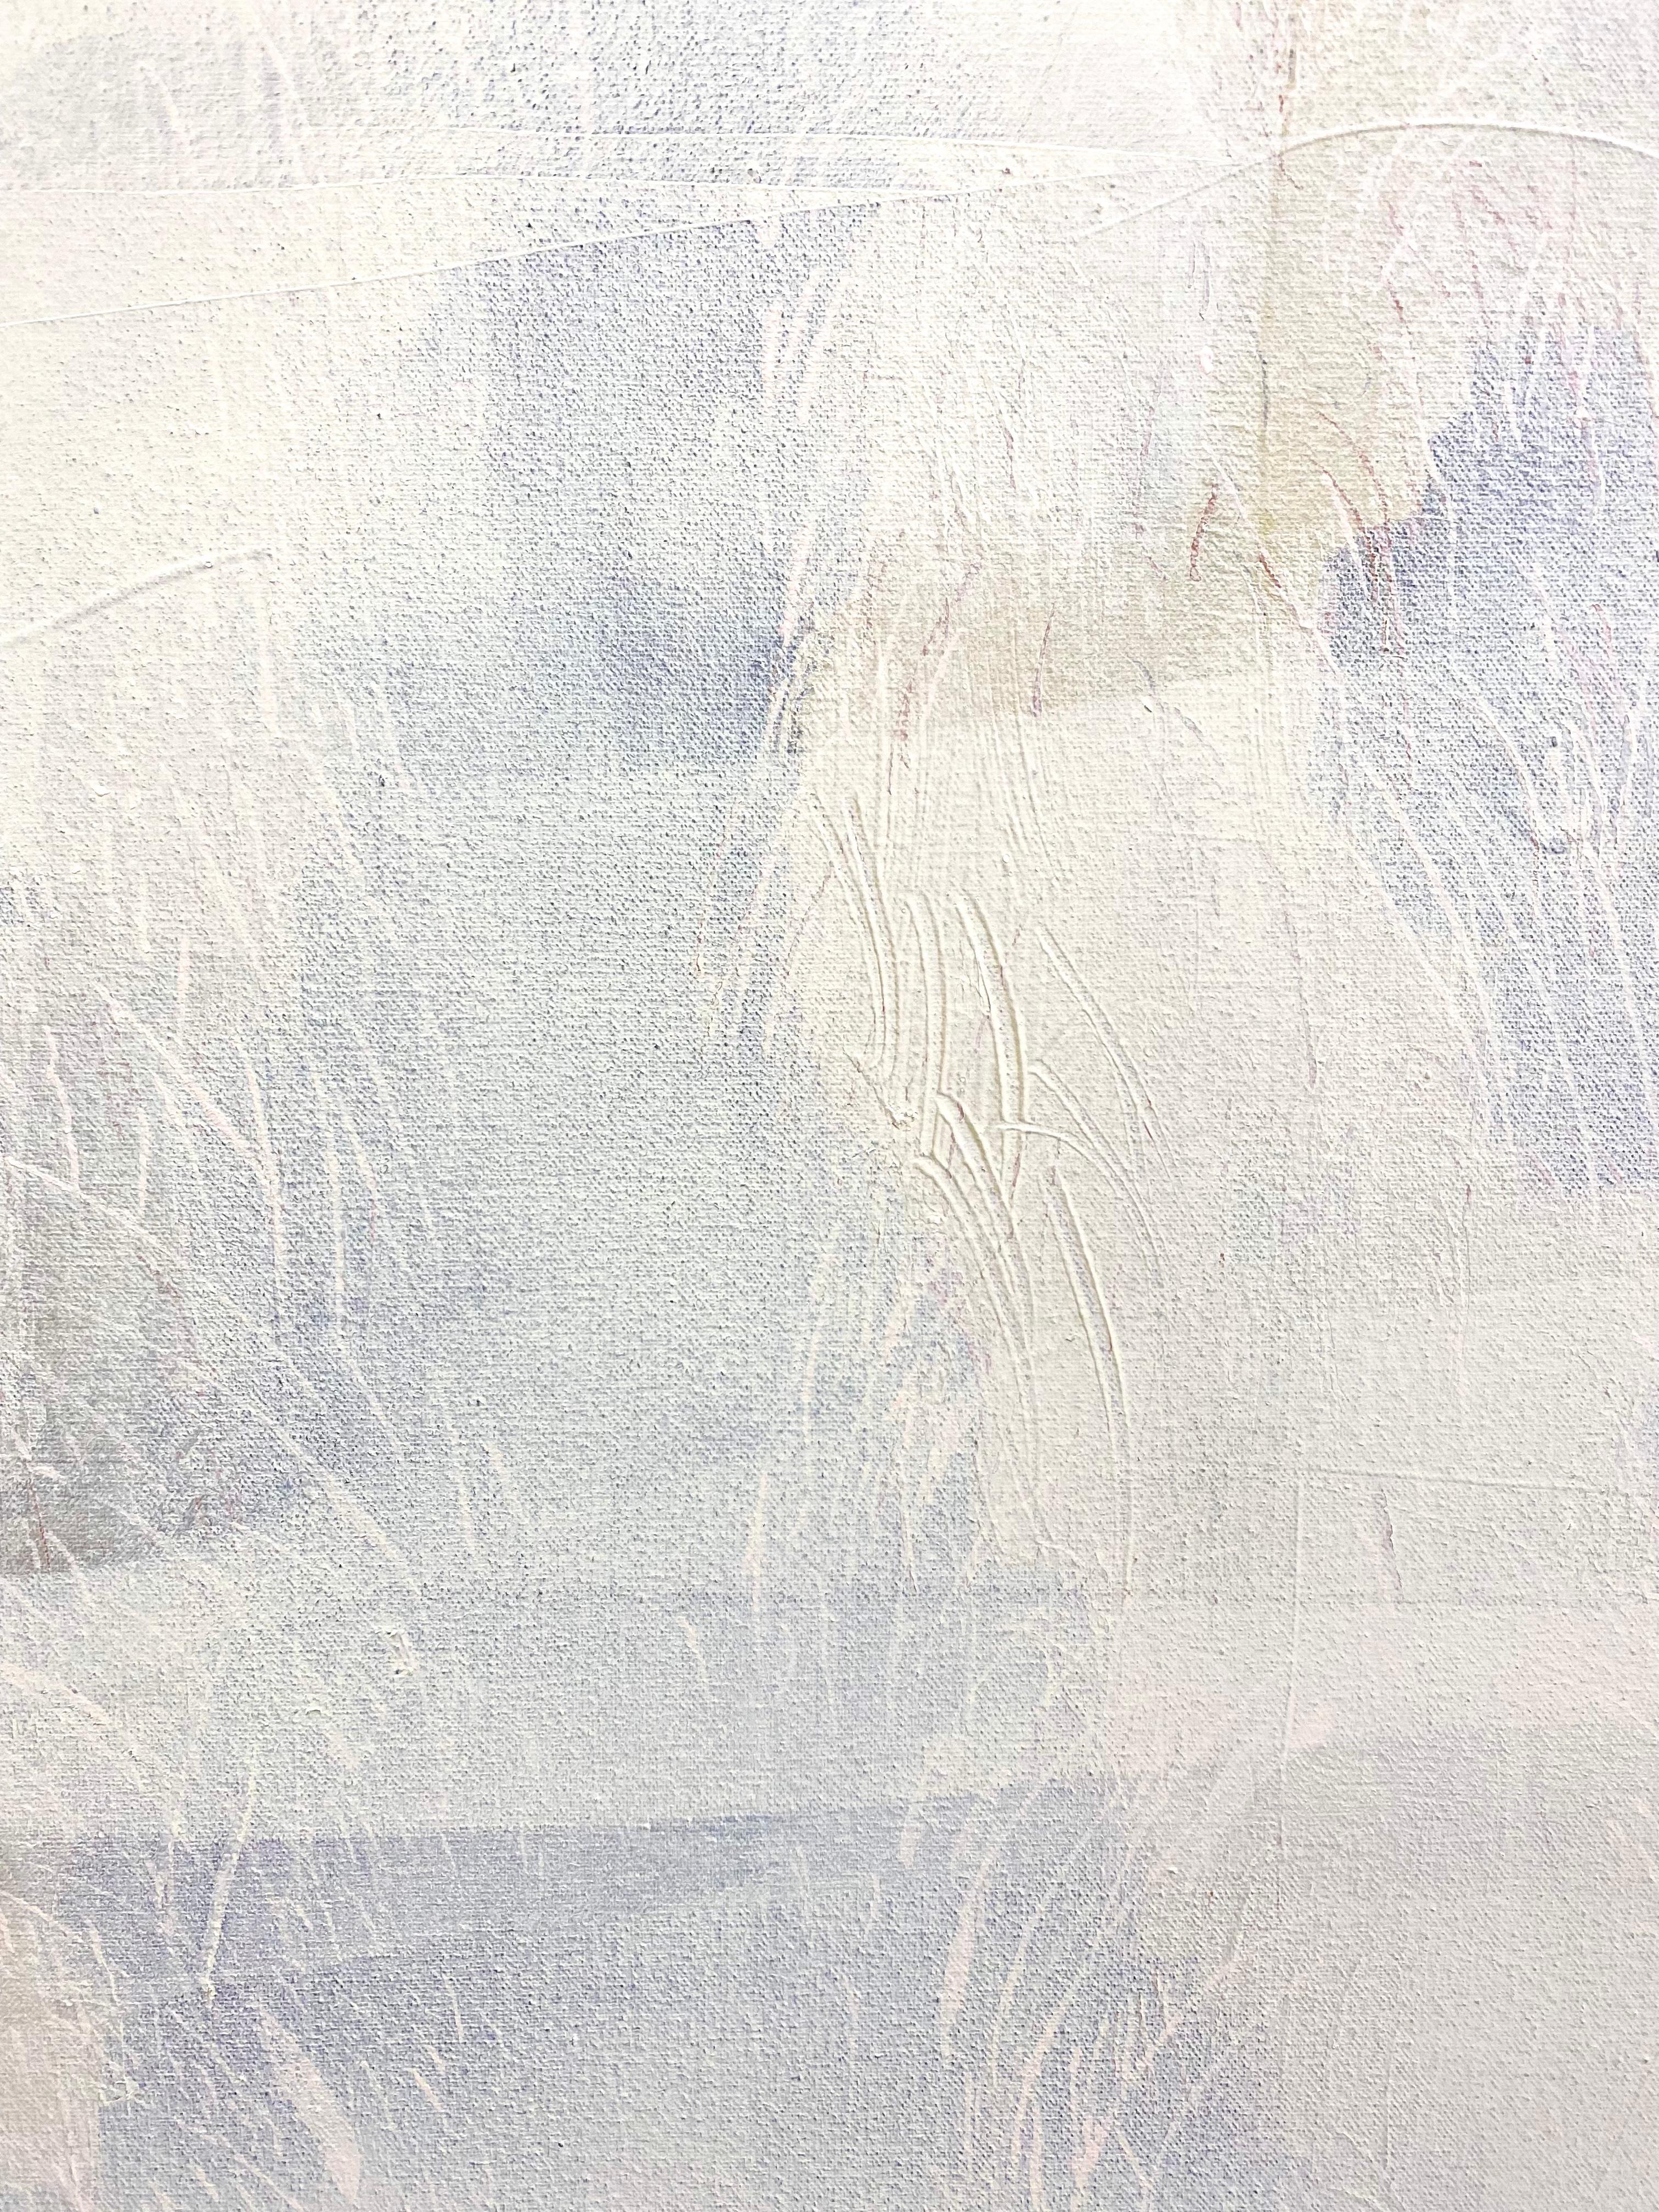 Abstract landscape of the salt marsh of East Hampton in winter whites, blues, and a hint of brown.

Lines, shapes, colors, and textures are as central to my work as is the process of creating them. A complex layering of these abstract elements